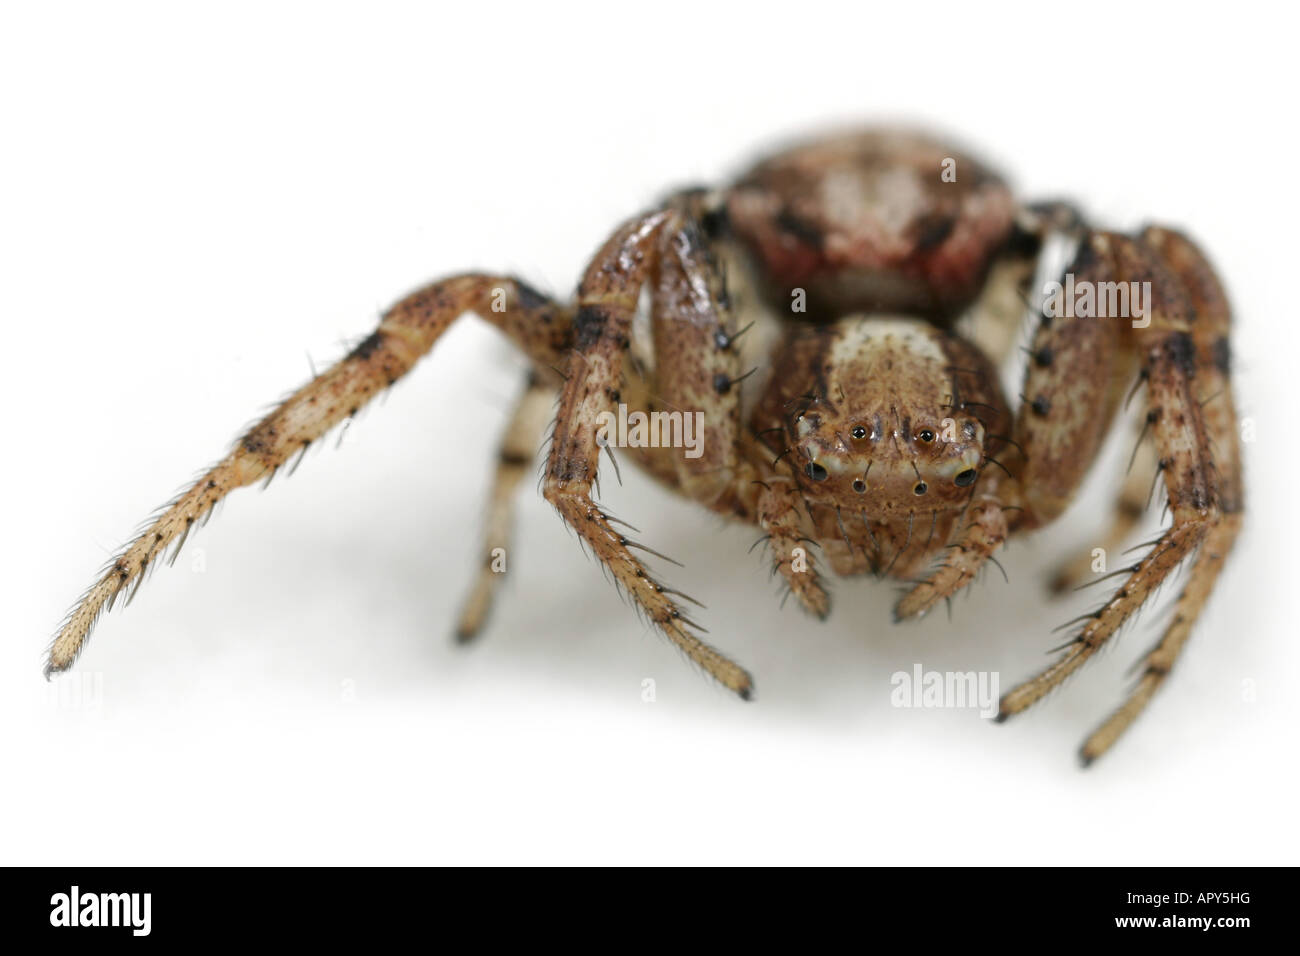 A female Crab spider, Xysticus audax, on white background, head-on view. Stock Photo